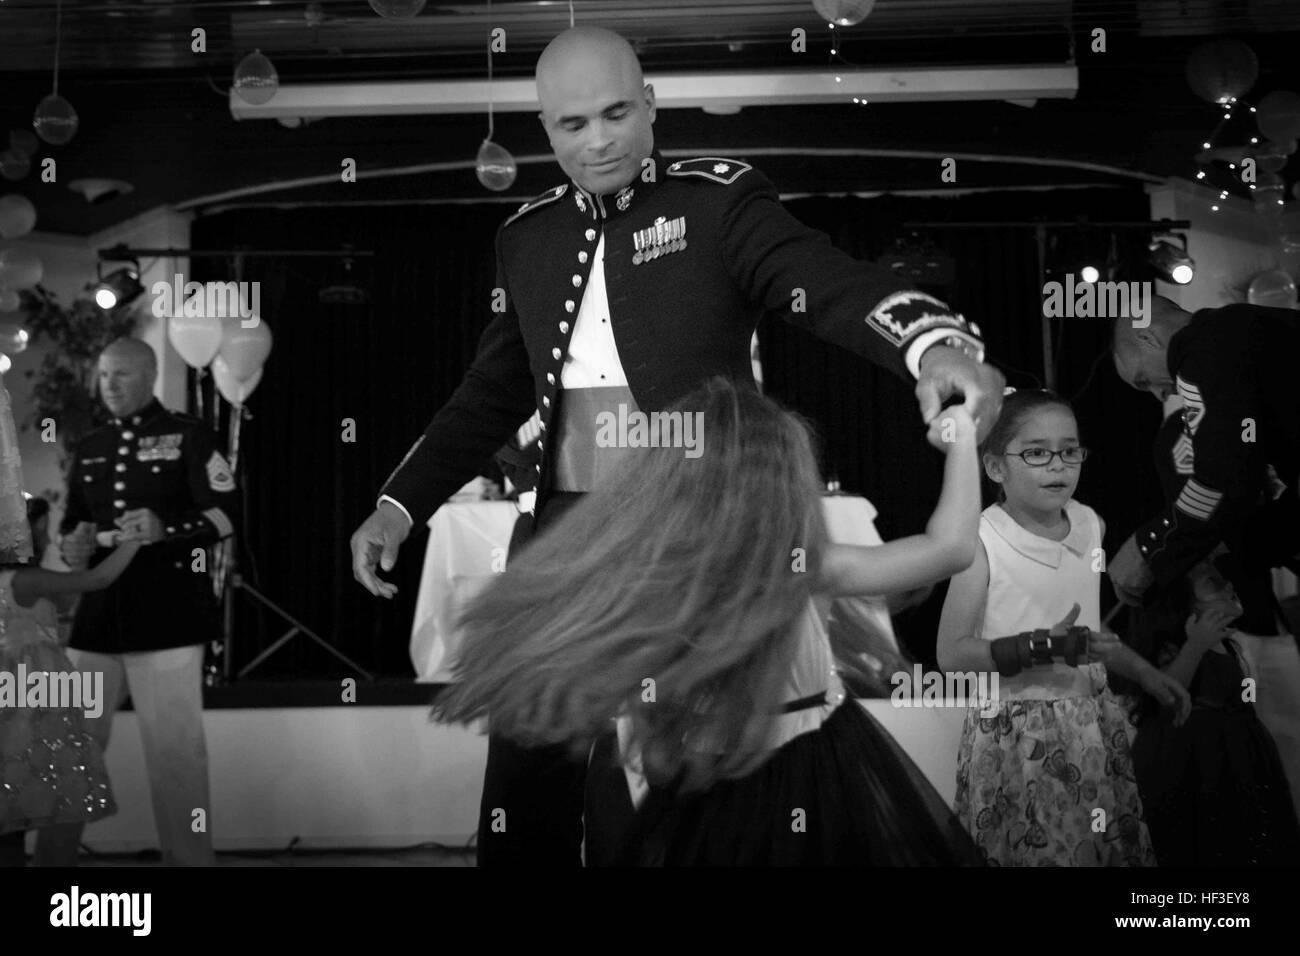 Lt. Col. Quintin D. Jones, commanding officer 1st Battalion, 3rd Marine Regiment, spins his daughter during the Father Daughter Dance hosted by 1st Battalion, 3rd Marines and the Armed Services YMCA at the Officer's Club, June 27, 2015. The event stressed the importance of a father-daughter relationship and gave them an opportunity to spend quality time together. (U.S. Marine Corps photo by Cpl. Brittney Vito/Released) Daddies, Daughters Dance Night Away 150627-M-TM809-001 Stock Photo